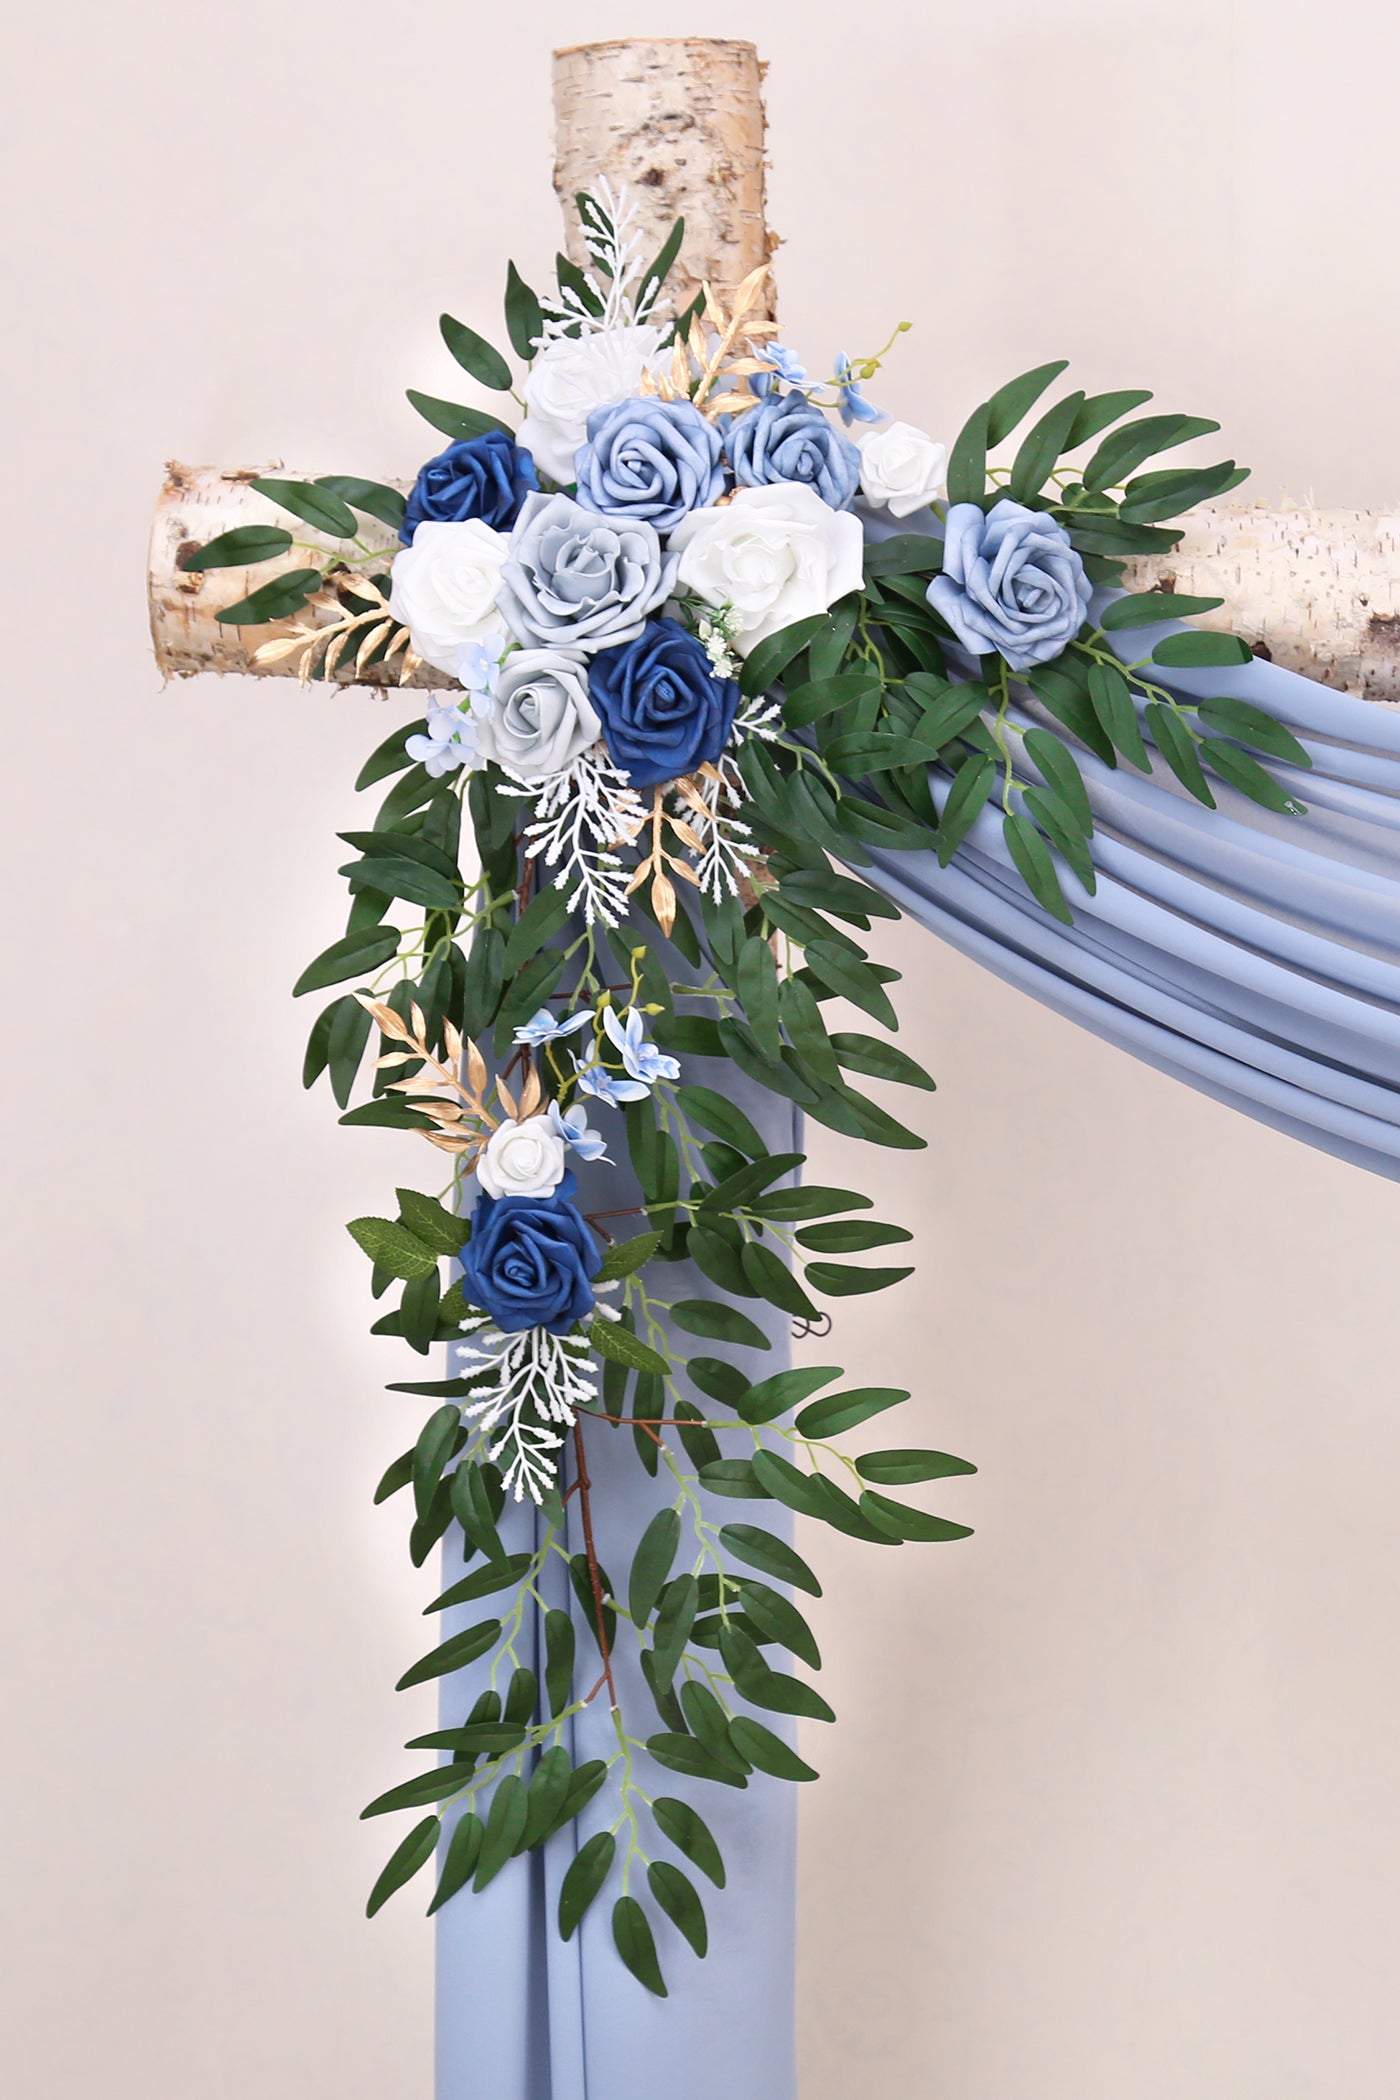 DORIS HOME Artificial Flower Swag Blue and White for Wedding Ceremony Sign Floral Decoration - Pack of 2